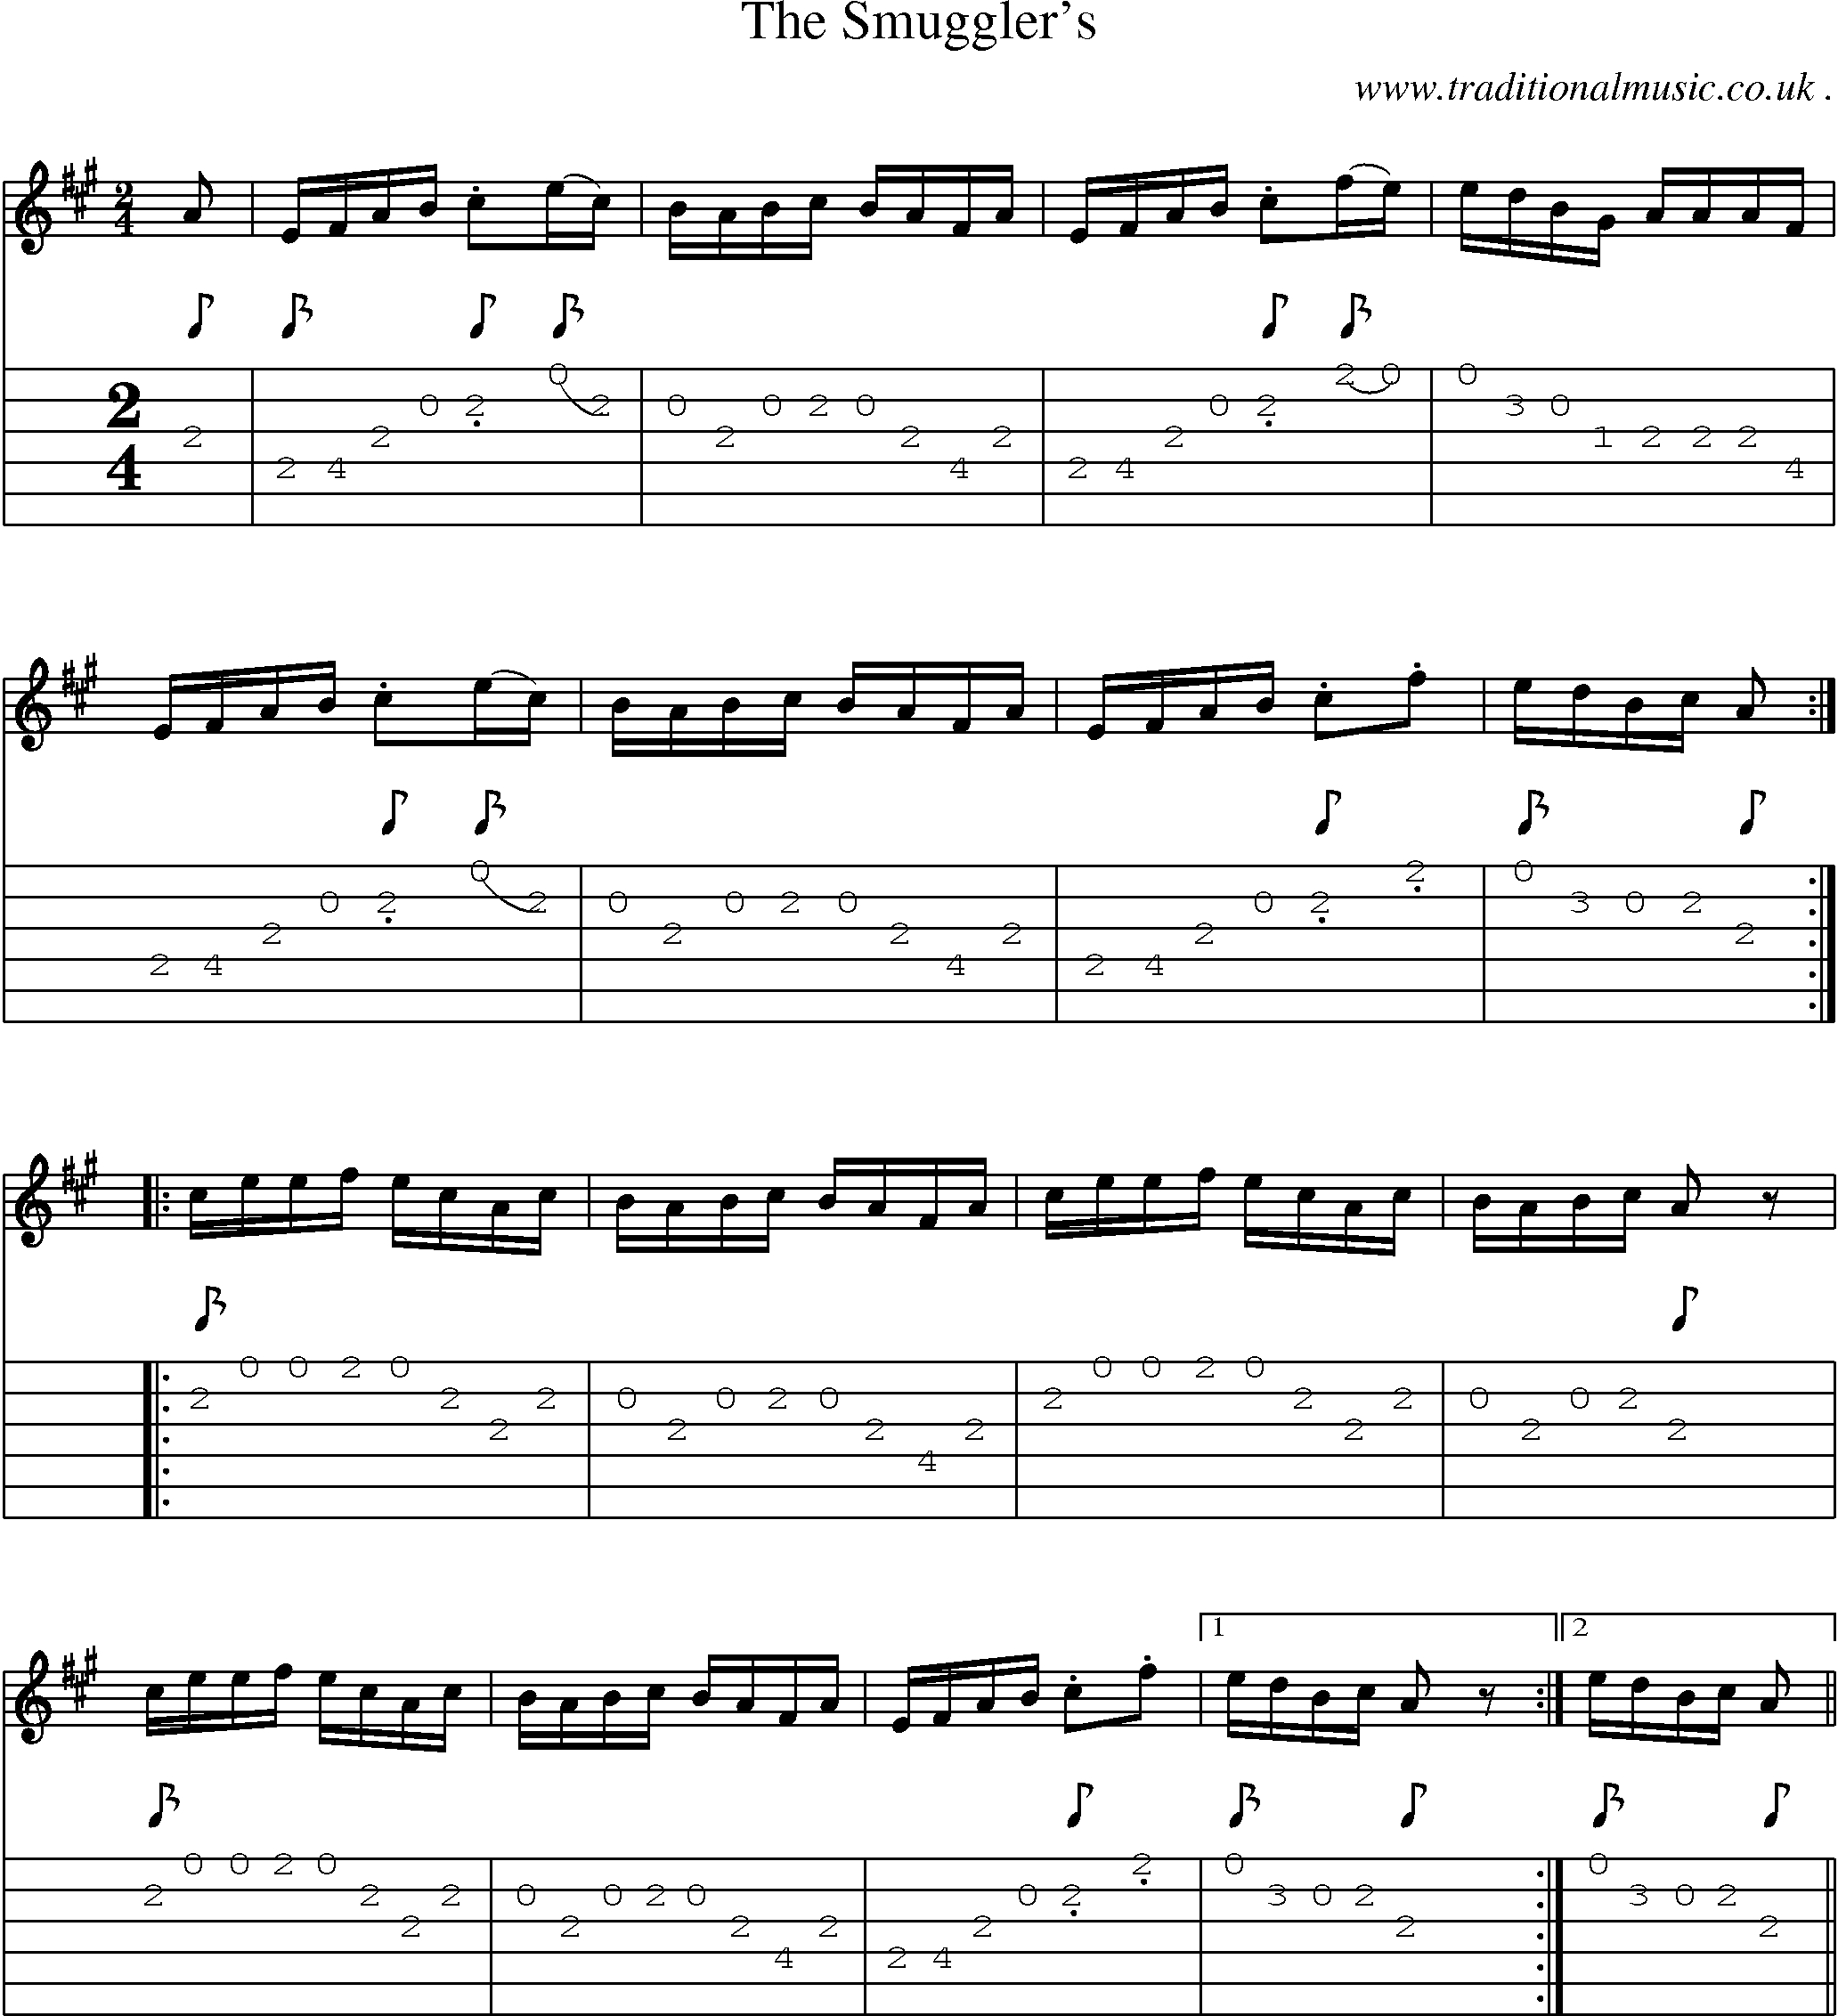 Sheet-Music and Guitar Tabs for The Smugglers